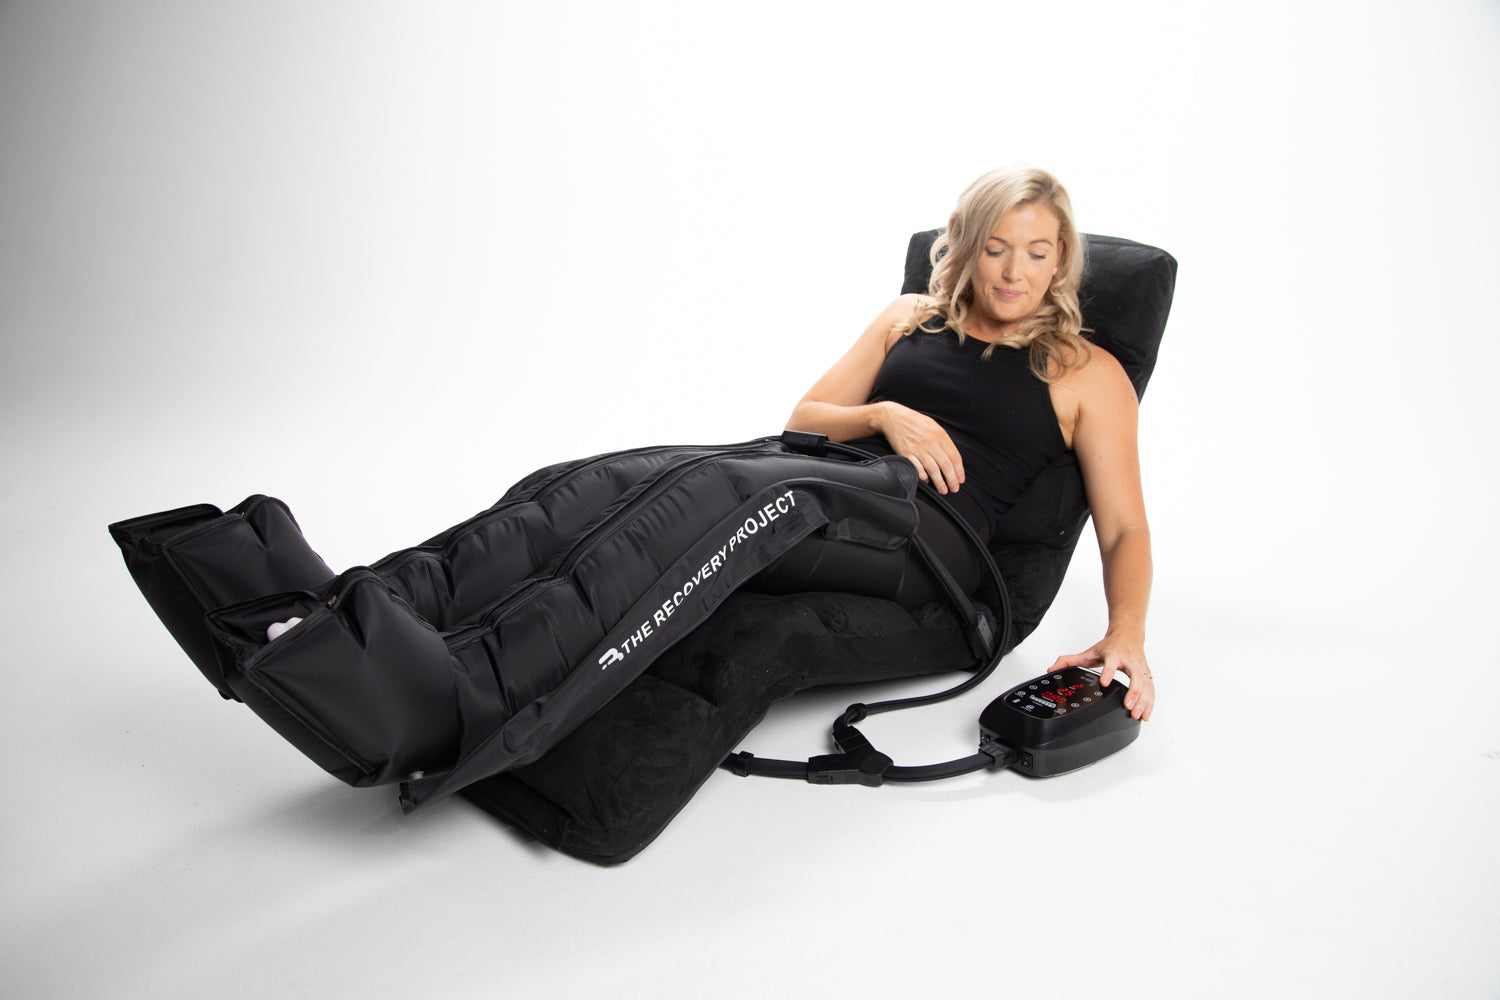 New and Upgraded 3.0 Full Body Compression + FREE Portable Ice bath!